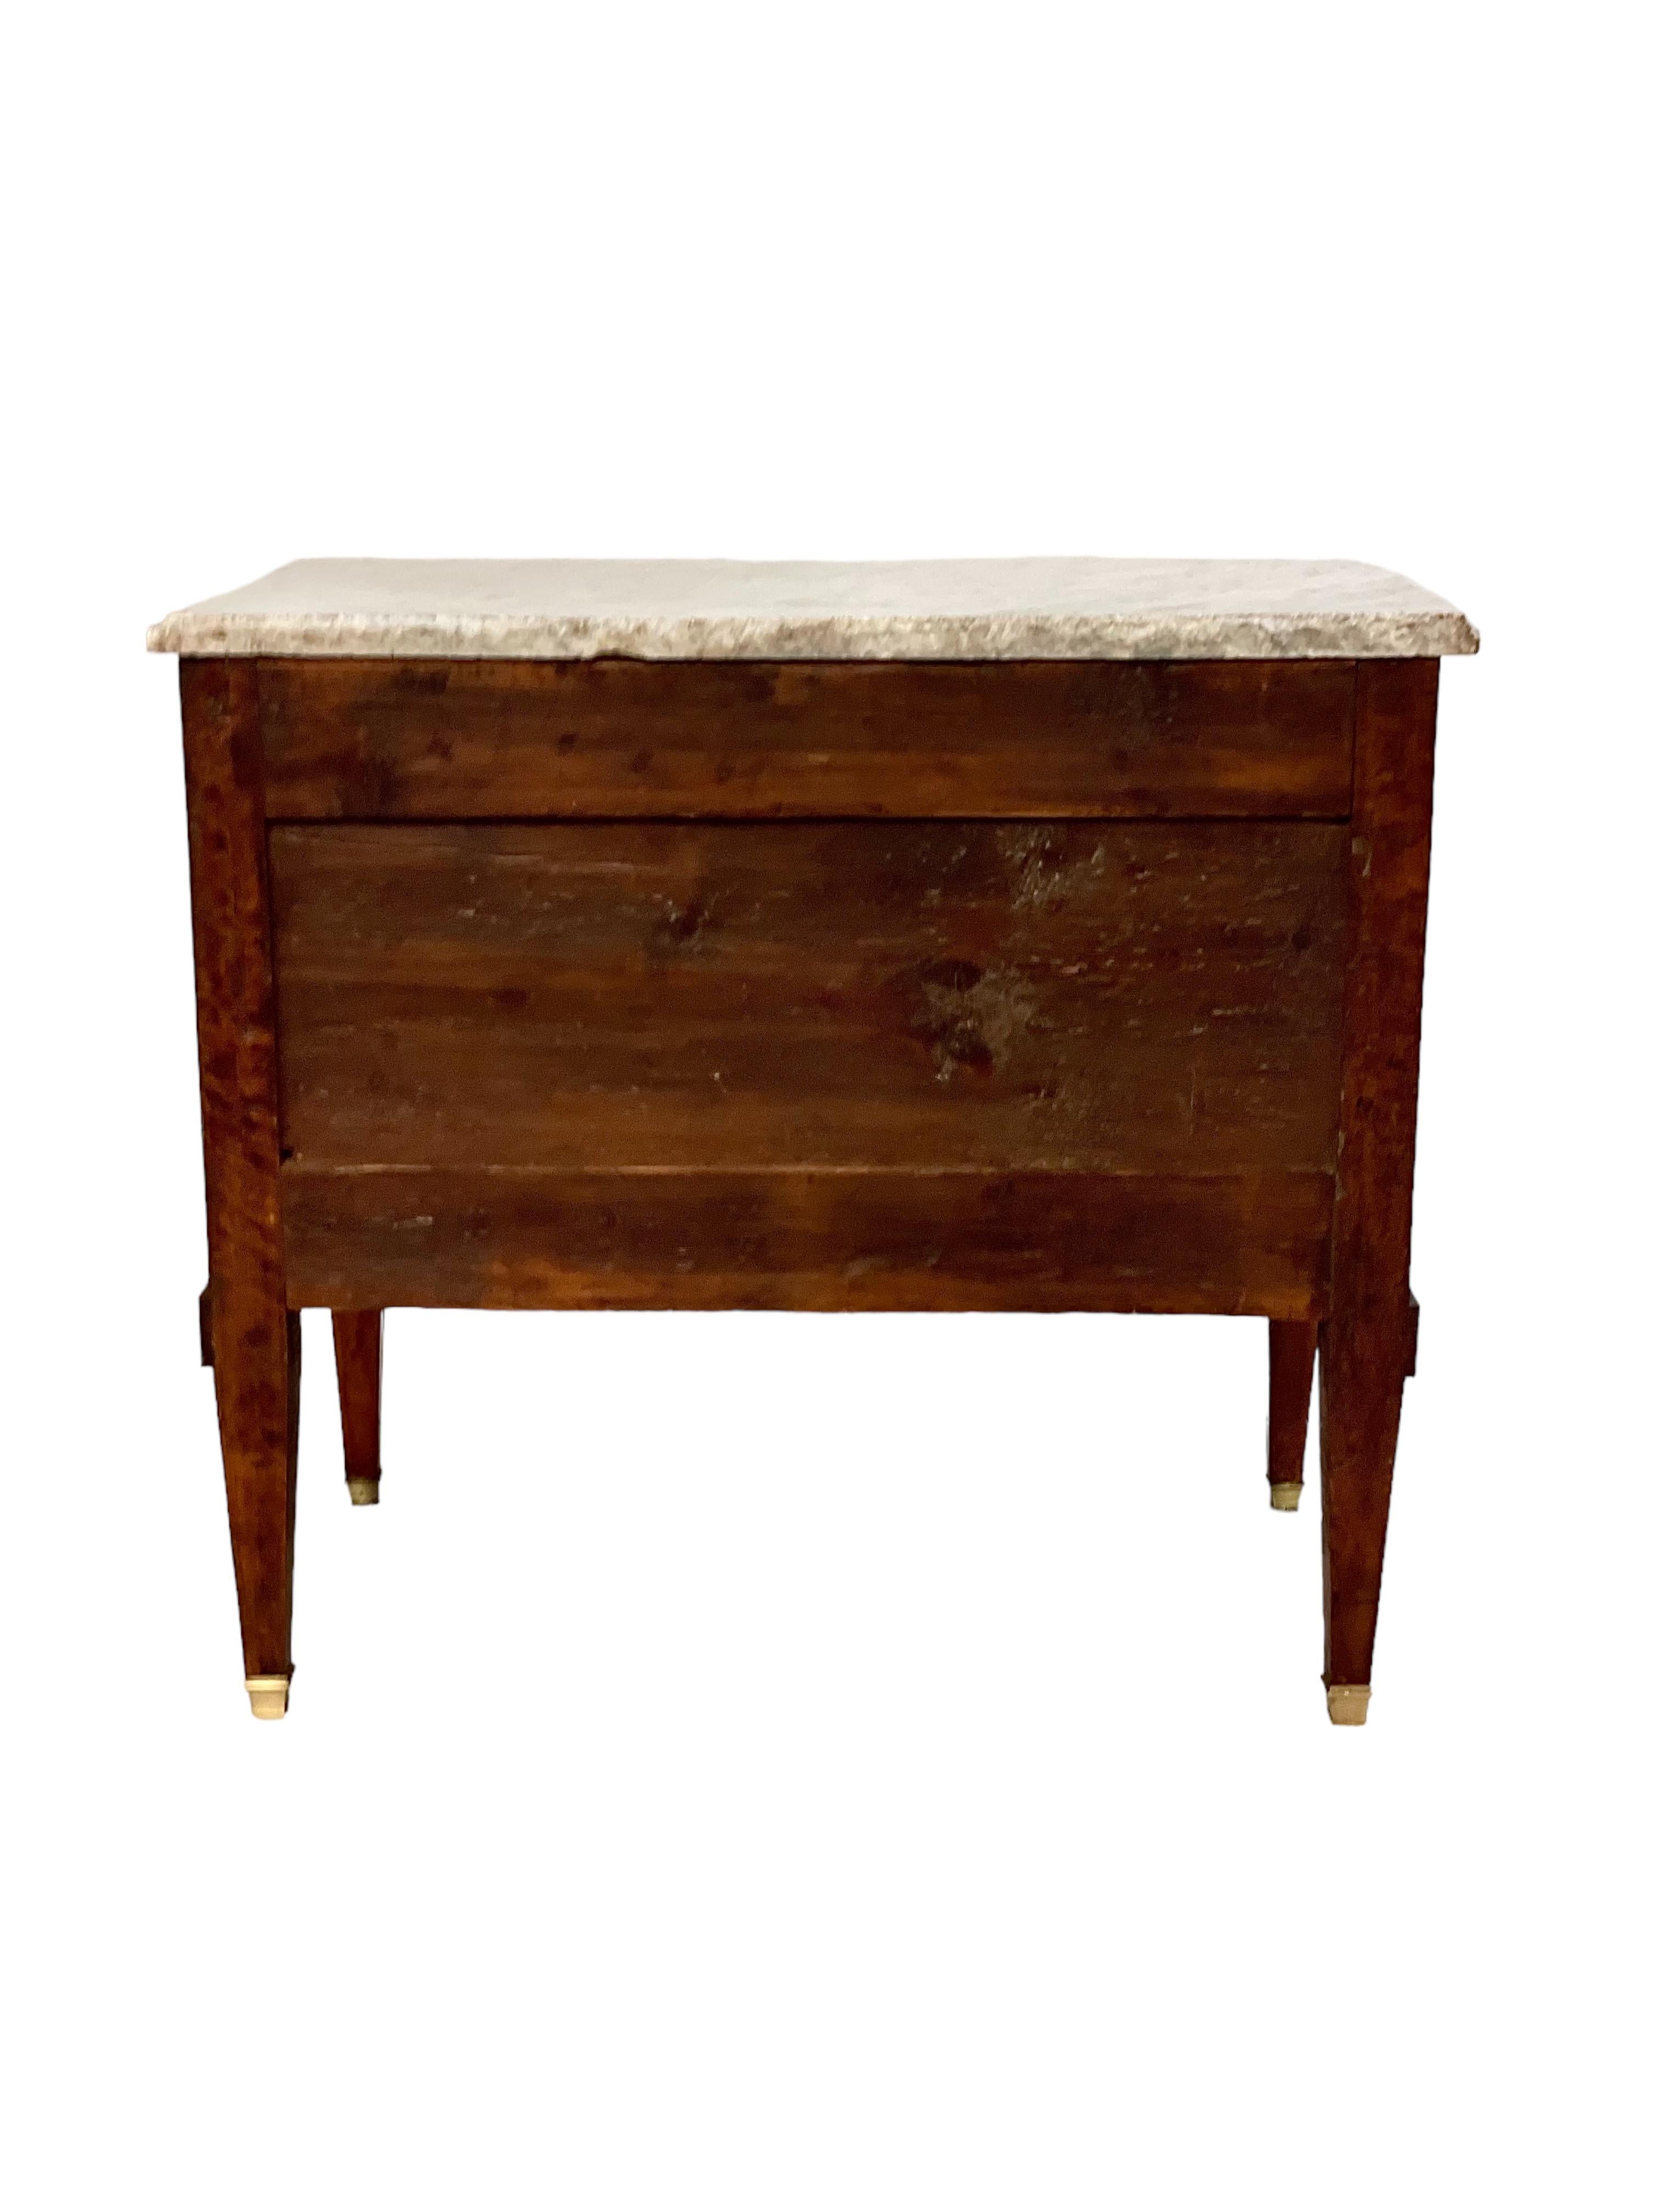 18th Century French Louis XVI Marquetry Commode For Sale 7